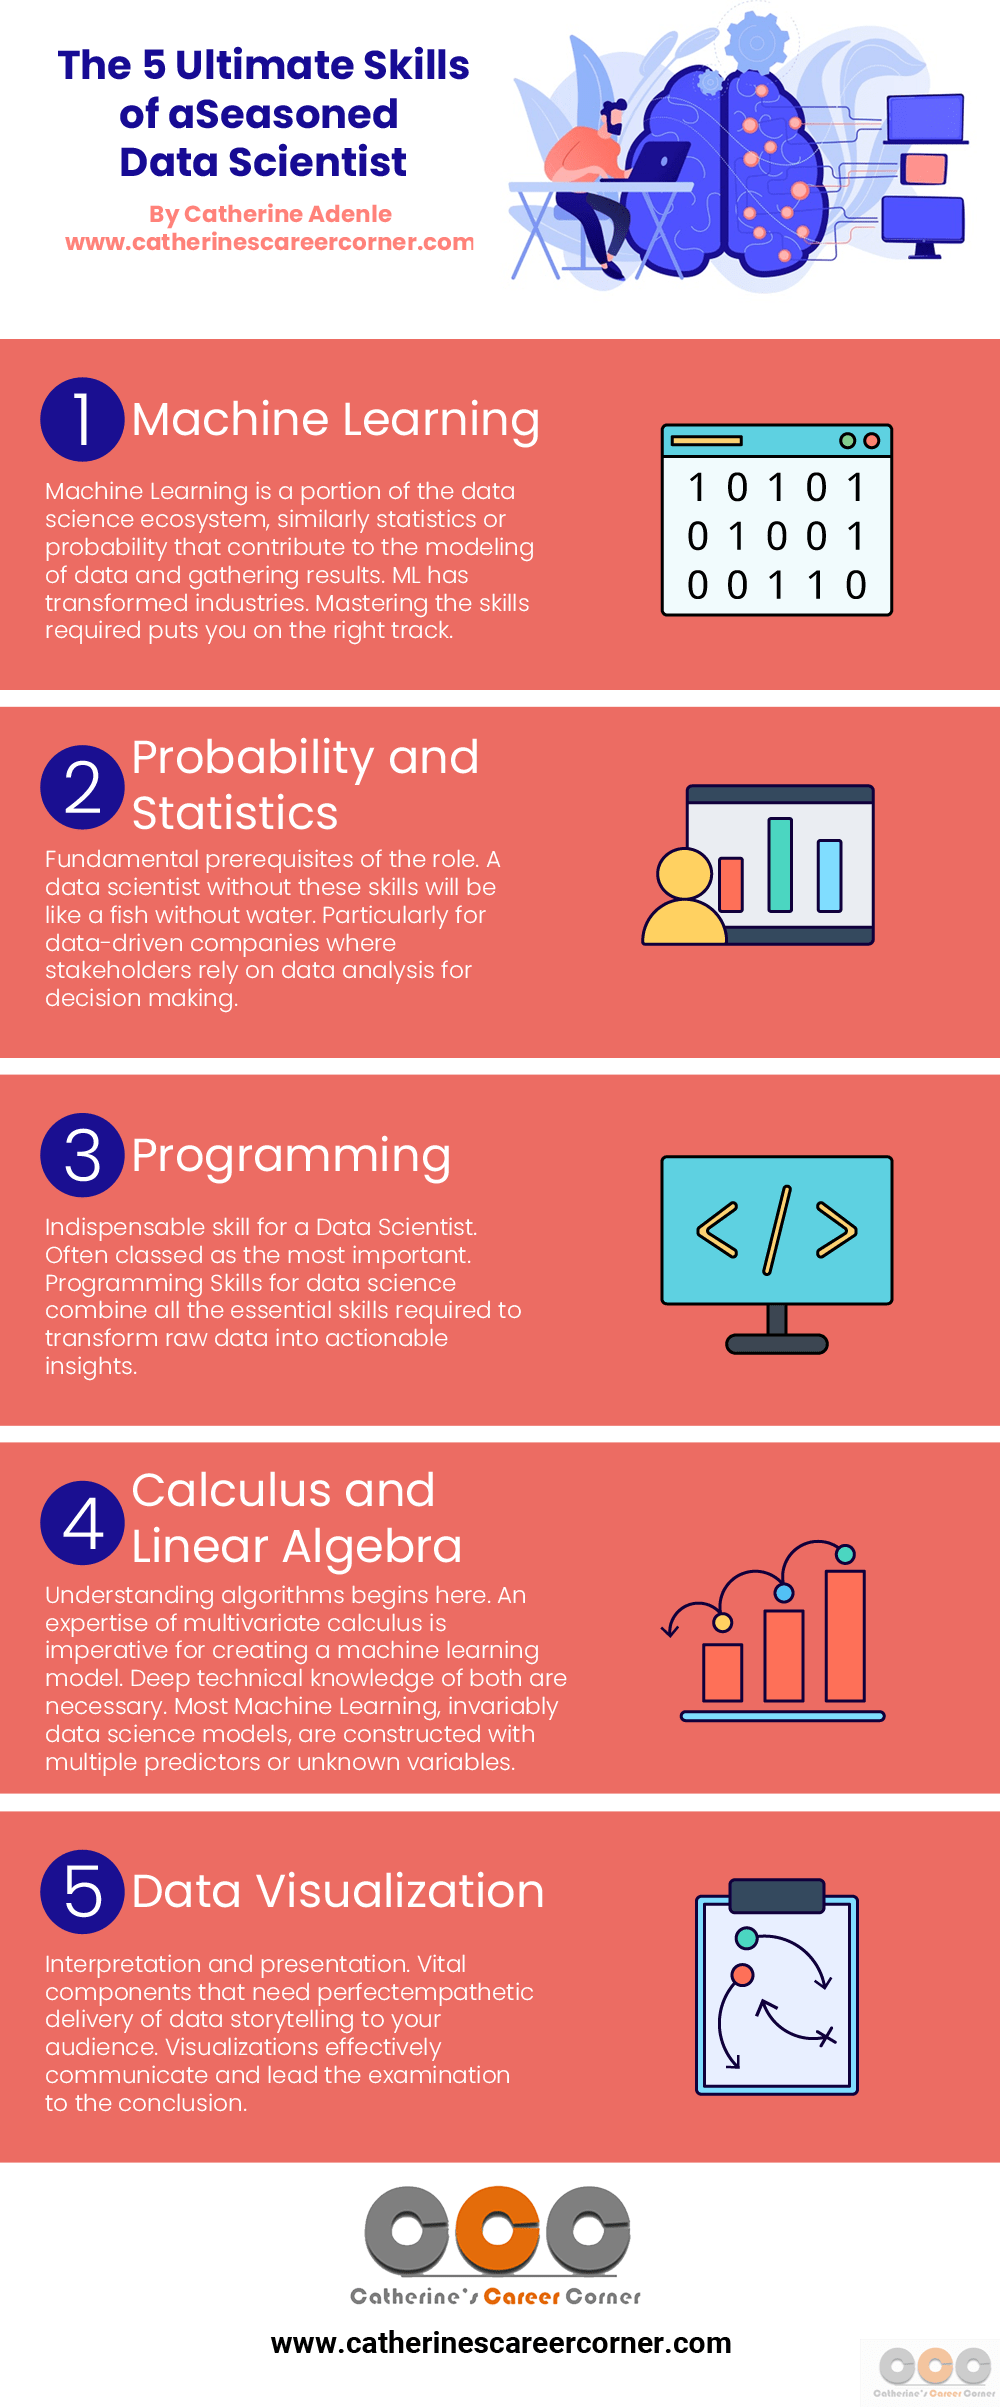 Infographic_The 5 Ultimate Skills of a Seasoned Data Scientist by Catherine Adenle